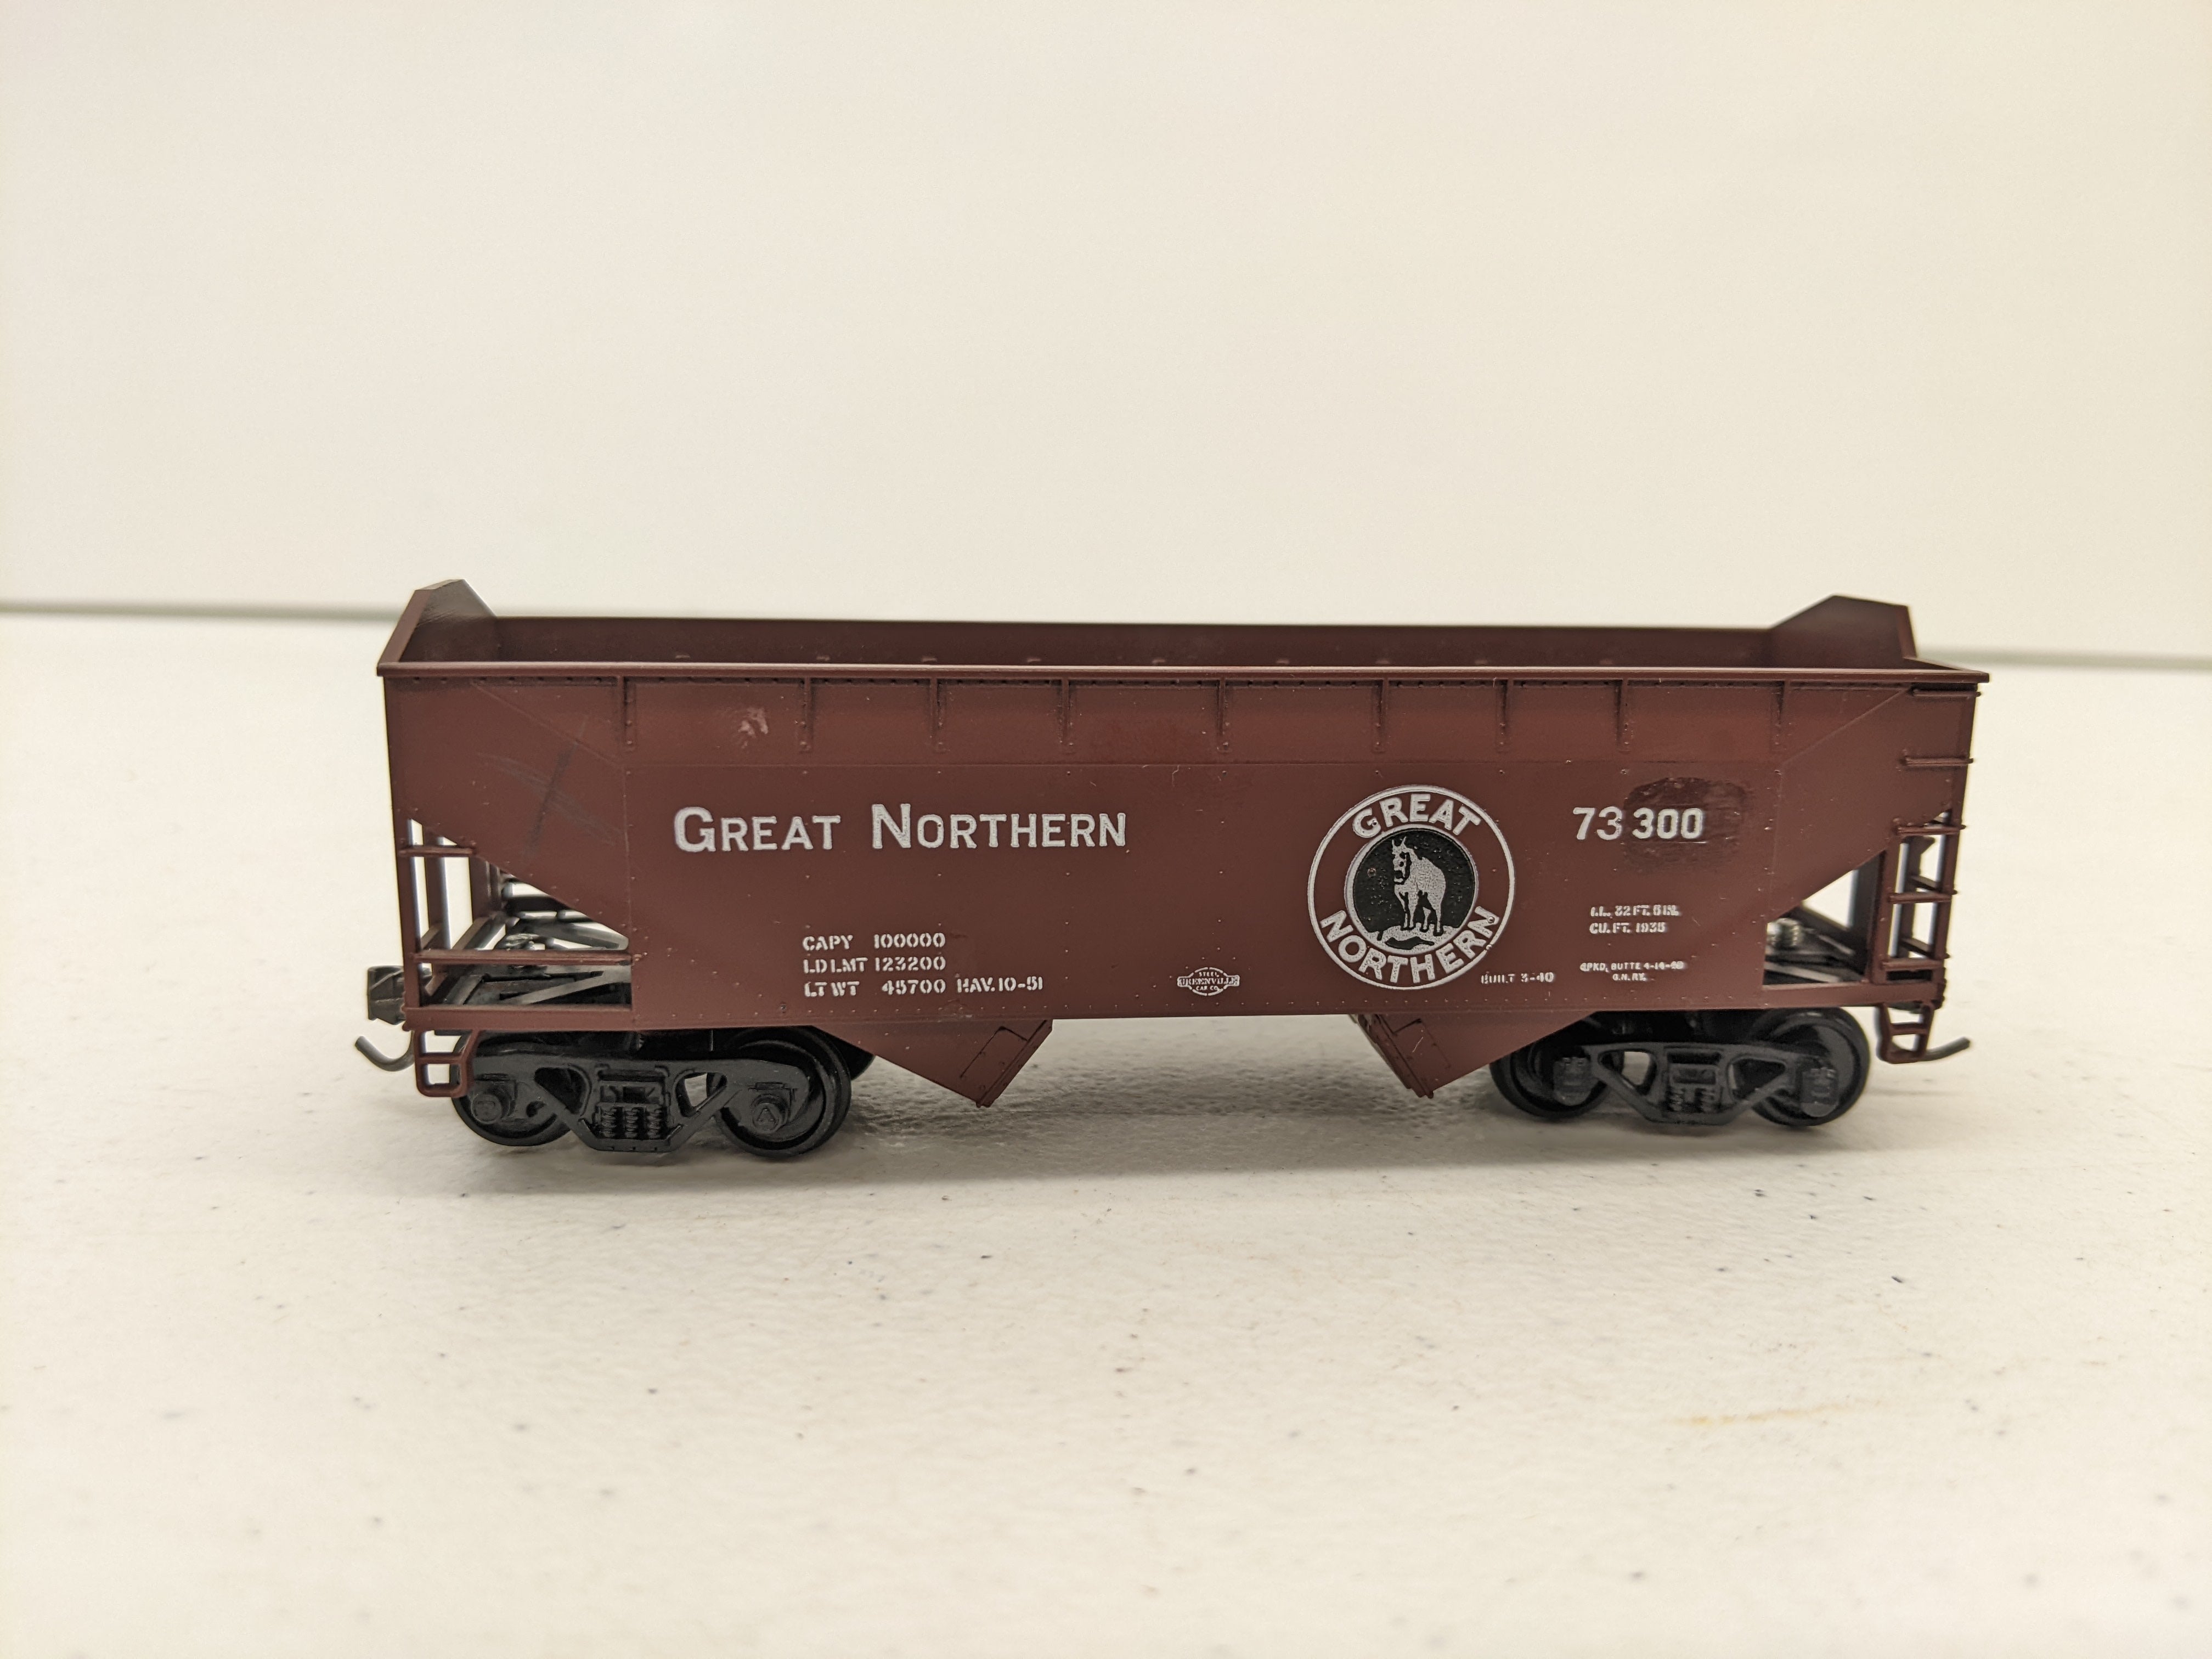 USED Athearn HO Scale, 34' 2-Bay Hopper, Great Northern #73300 ((Customed))